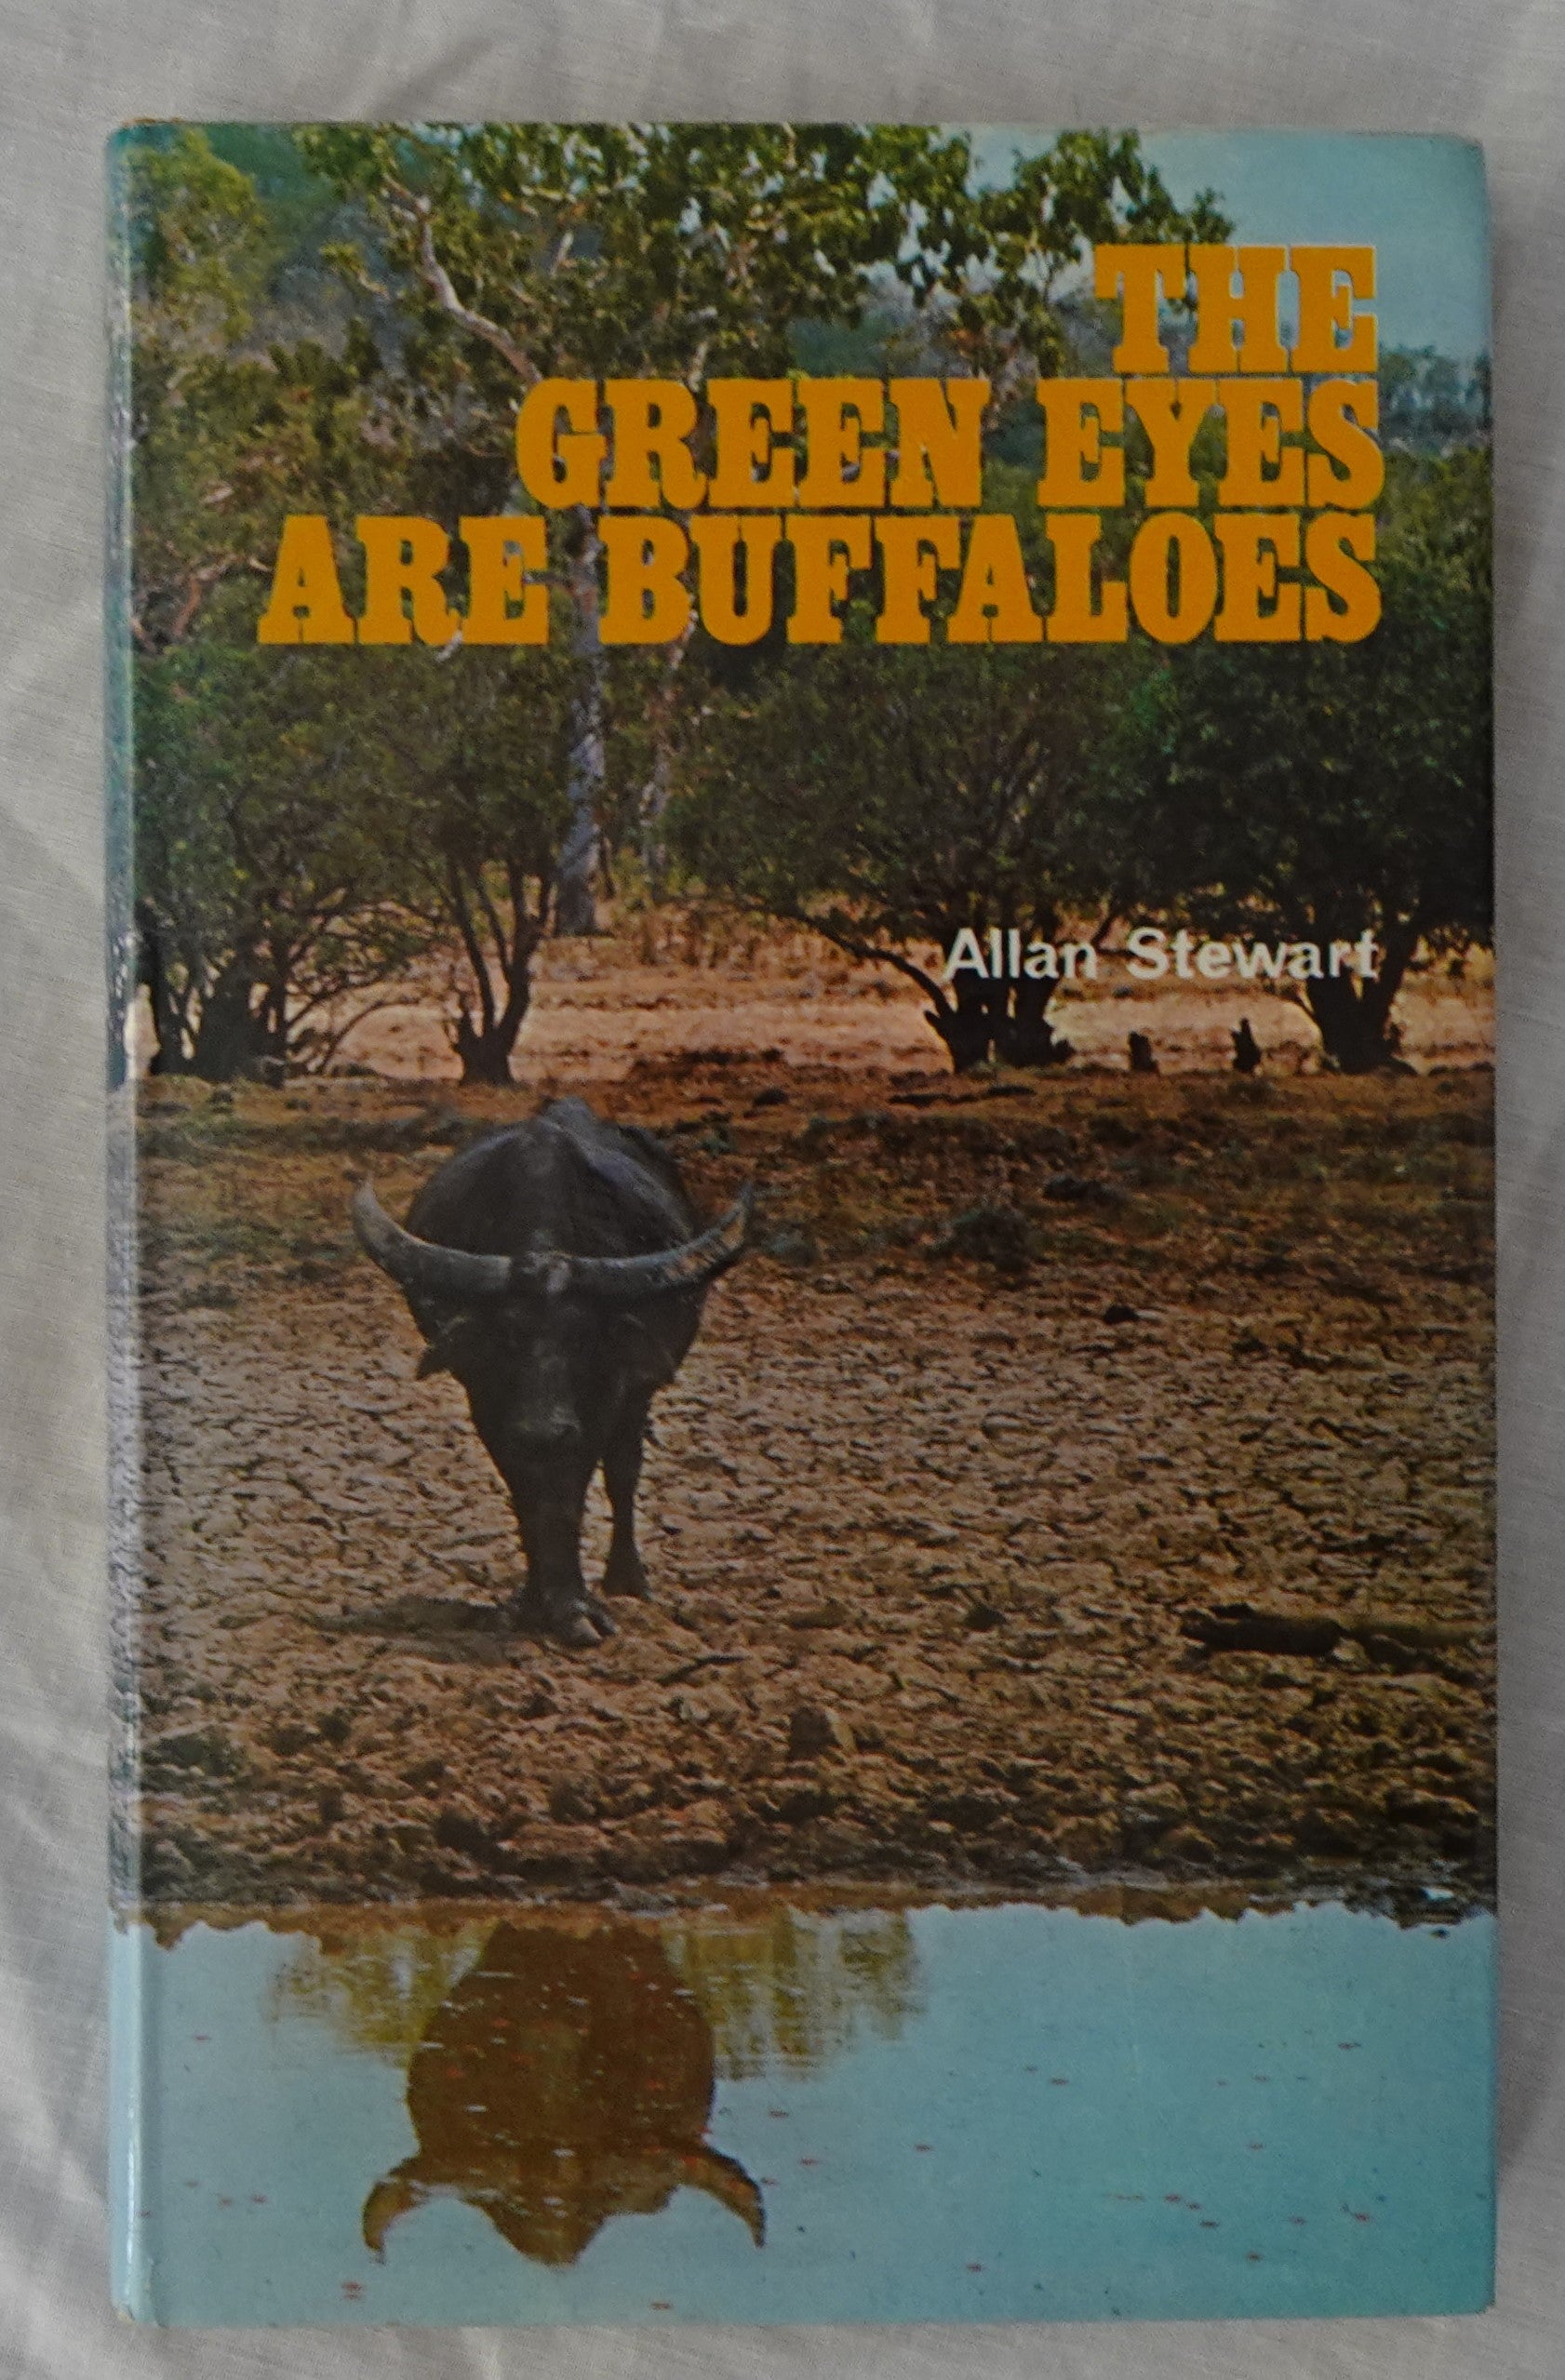 The Green Eyes are Buffaloes by Allan Stewart